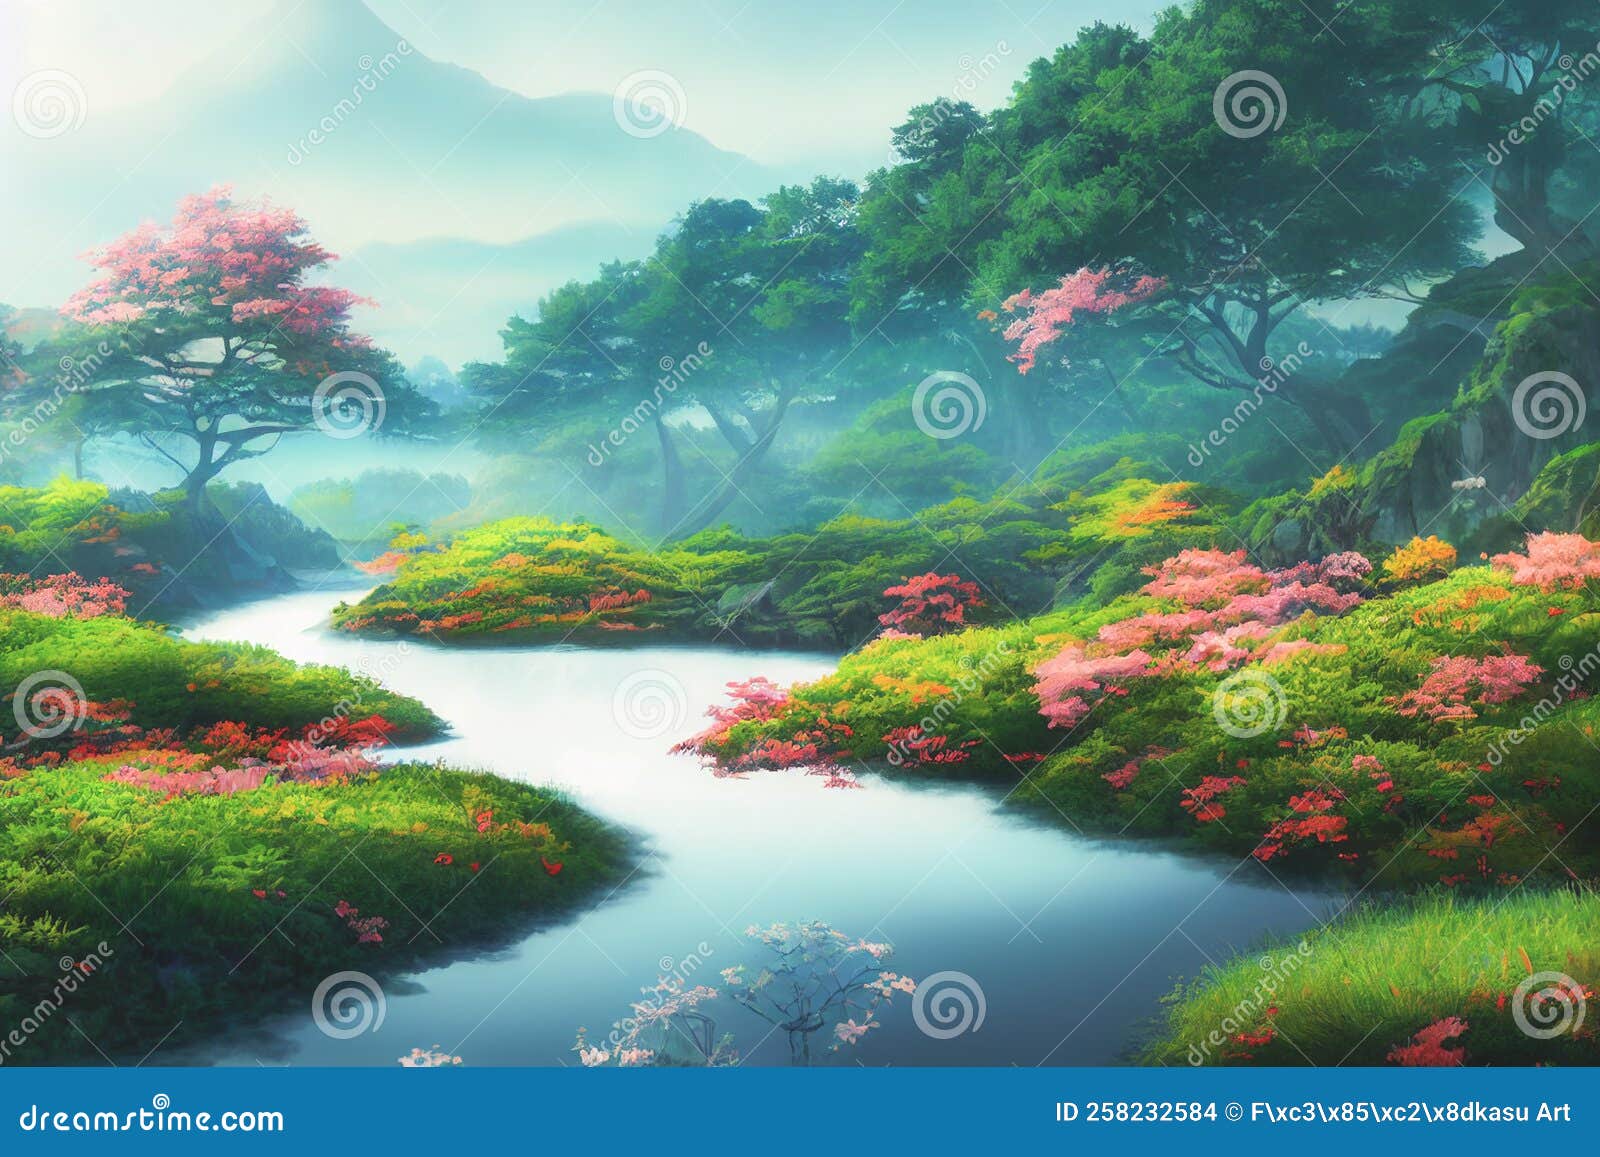 Beautiful Scenery Backgrounds (52+ pictures)